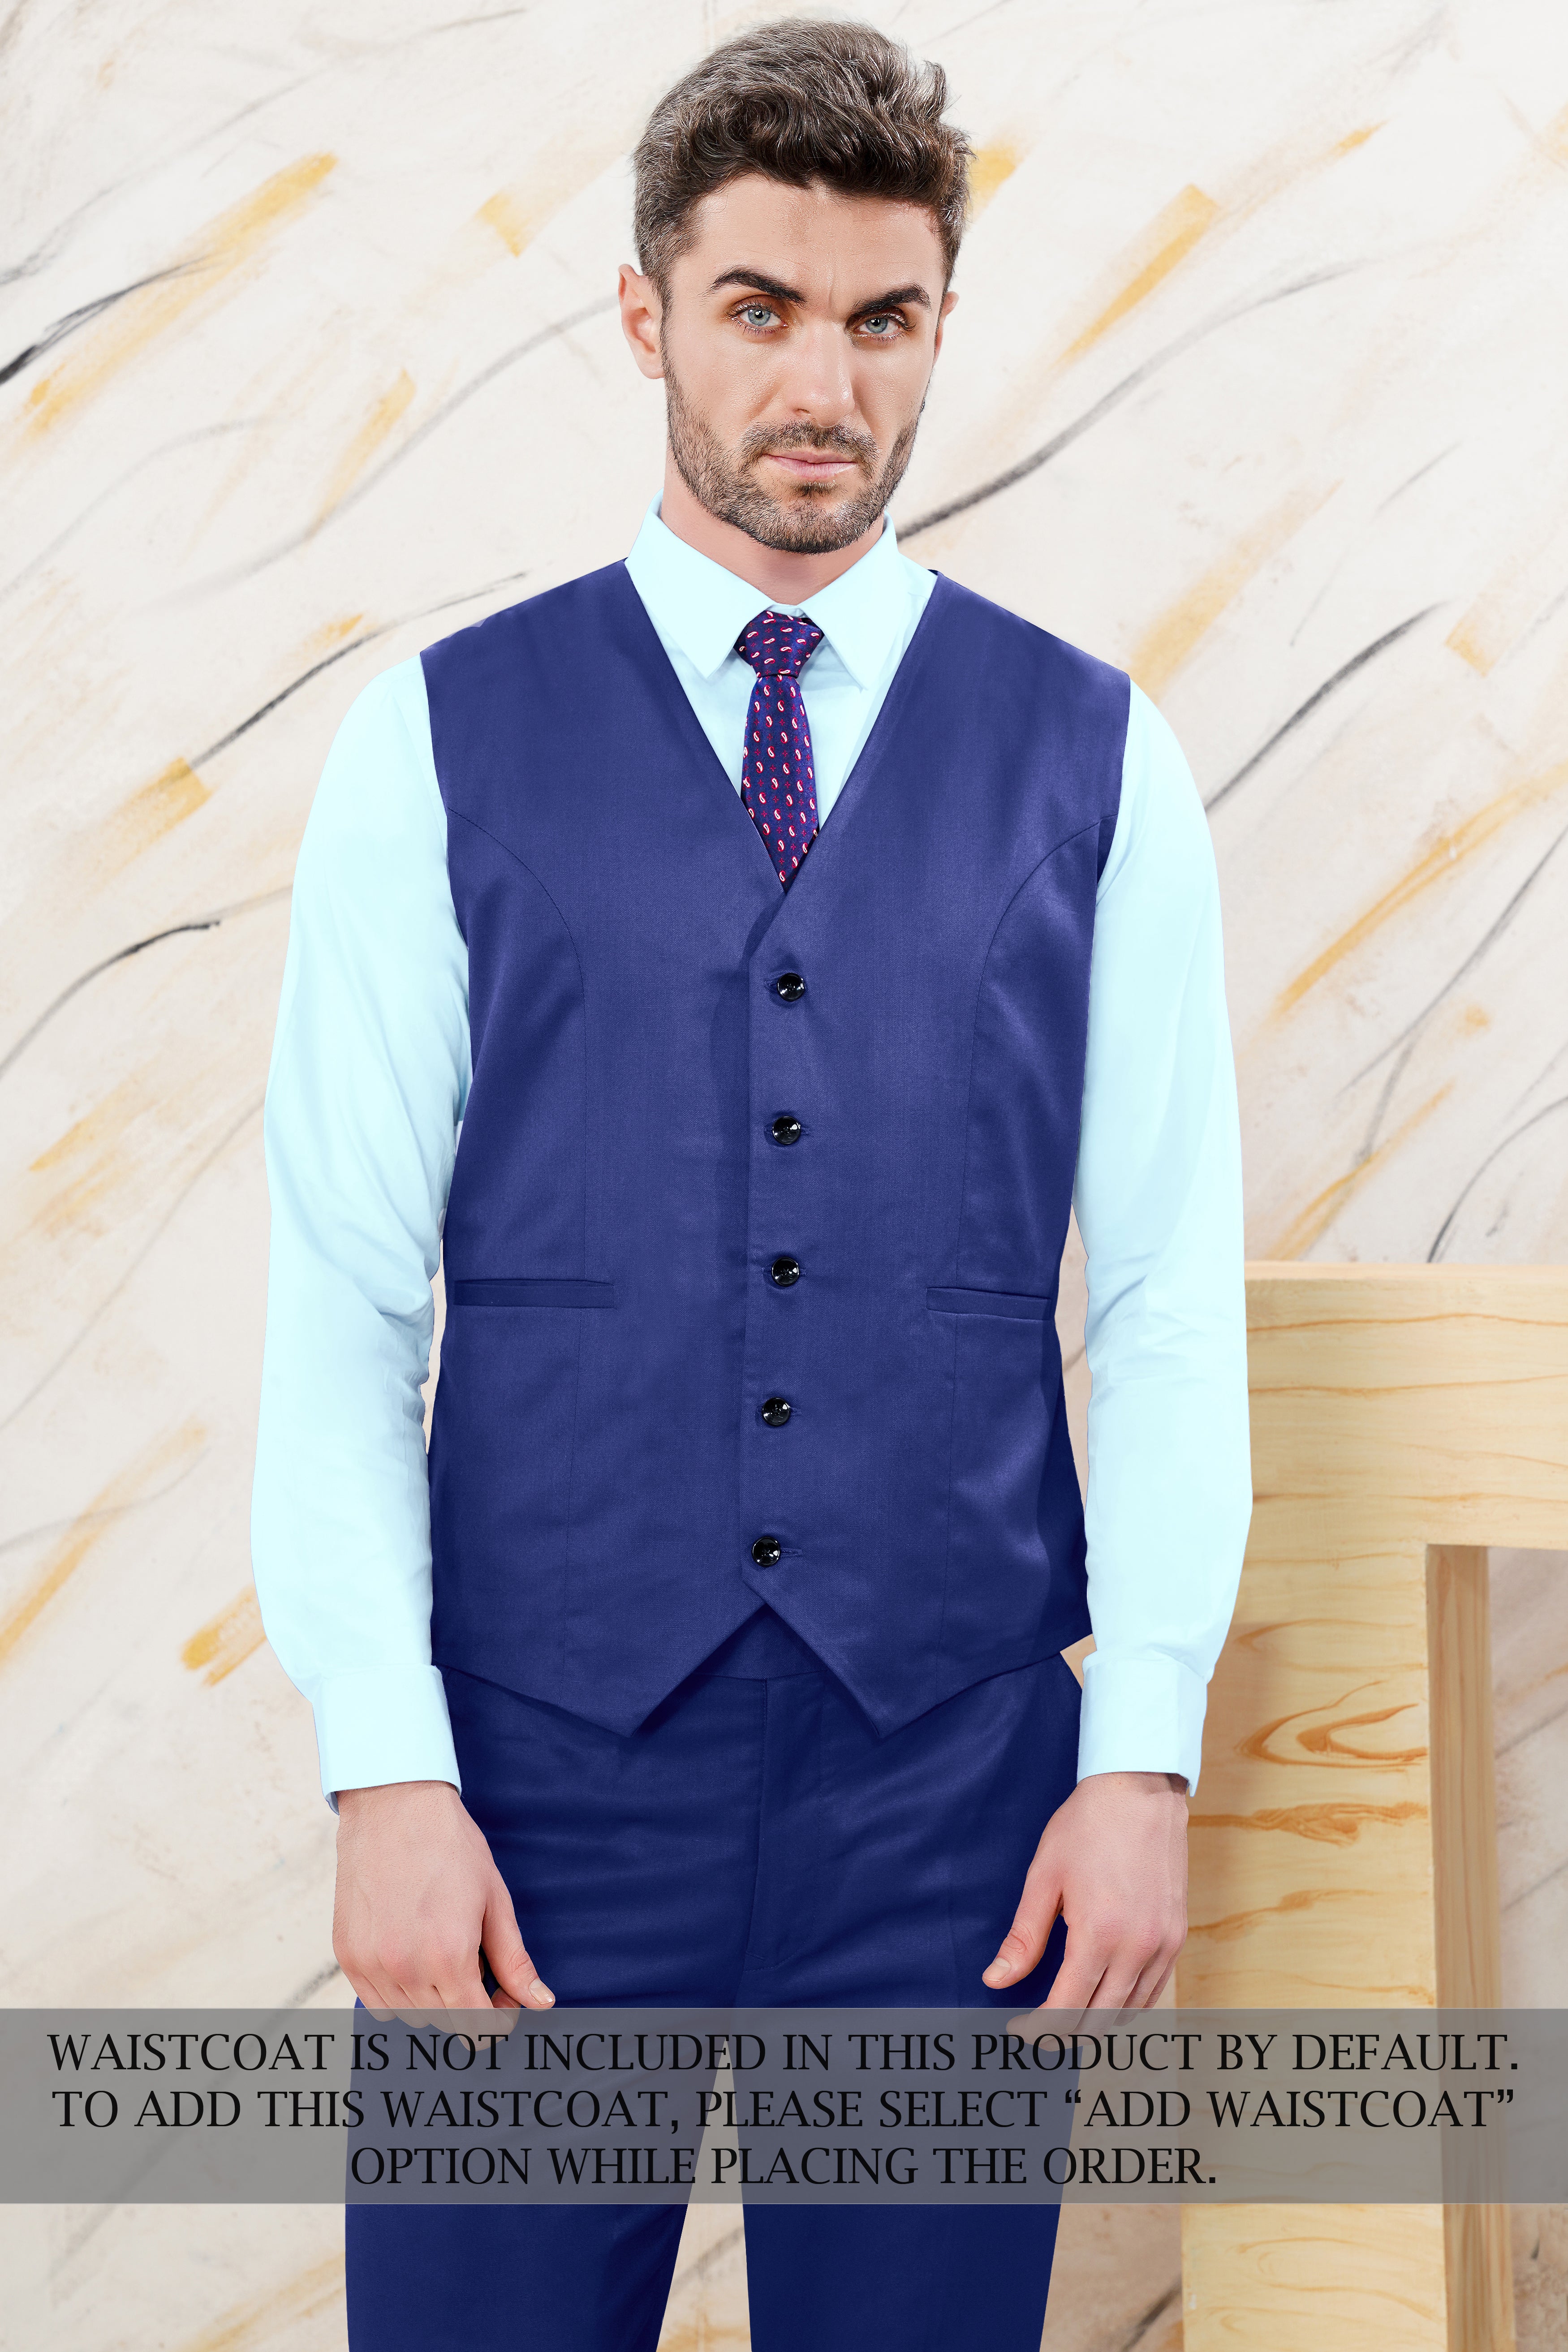 Admiral Blue Wool Rich Single Breasted Suit ST3057-SB-36, ST3057-SB-38, ST3057-SB-40, ST3057-SB-42, ST3057-SB-44, ST3057-SB-46, ST3057-SB-48, ST3057-SB-50, ST3057-SB-52, ST3057-SB-54, ST3057-SB-56, ST3057-SB-58, ST3057-SB-60